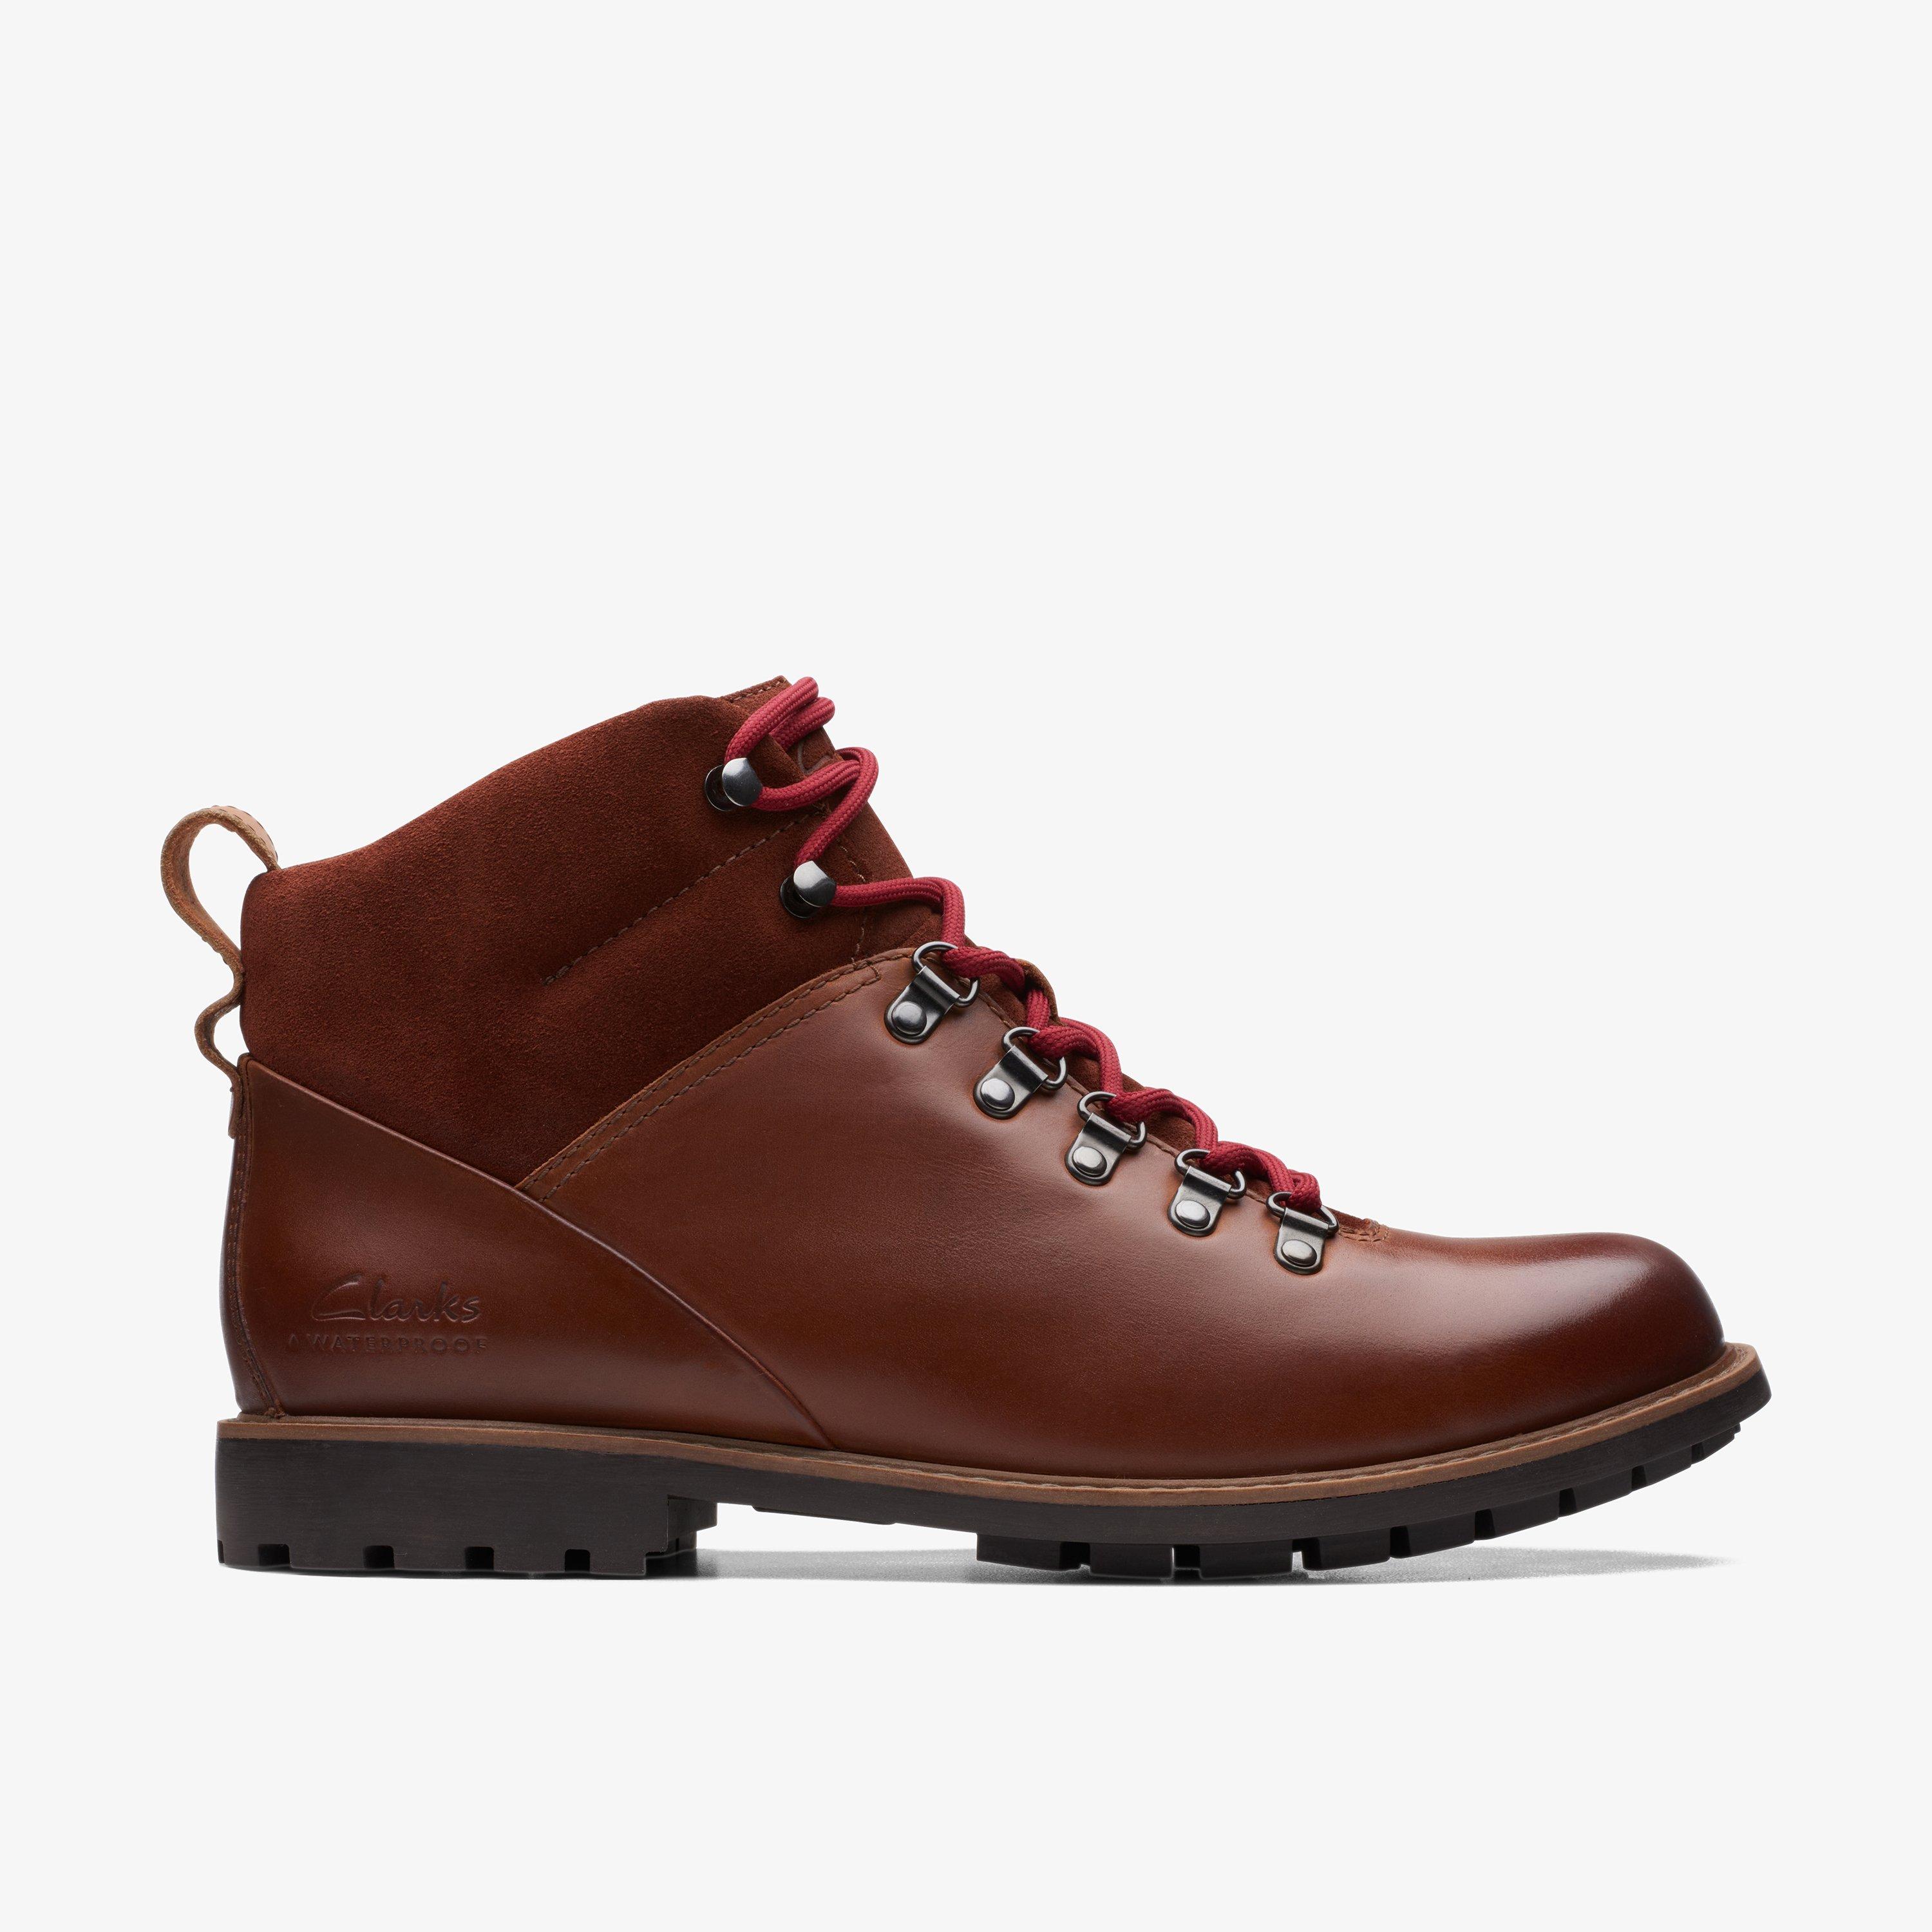 Mens WestcombeHiWP British Tan Lea Boots | Clarks Outlet